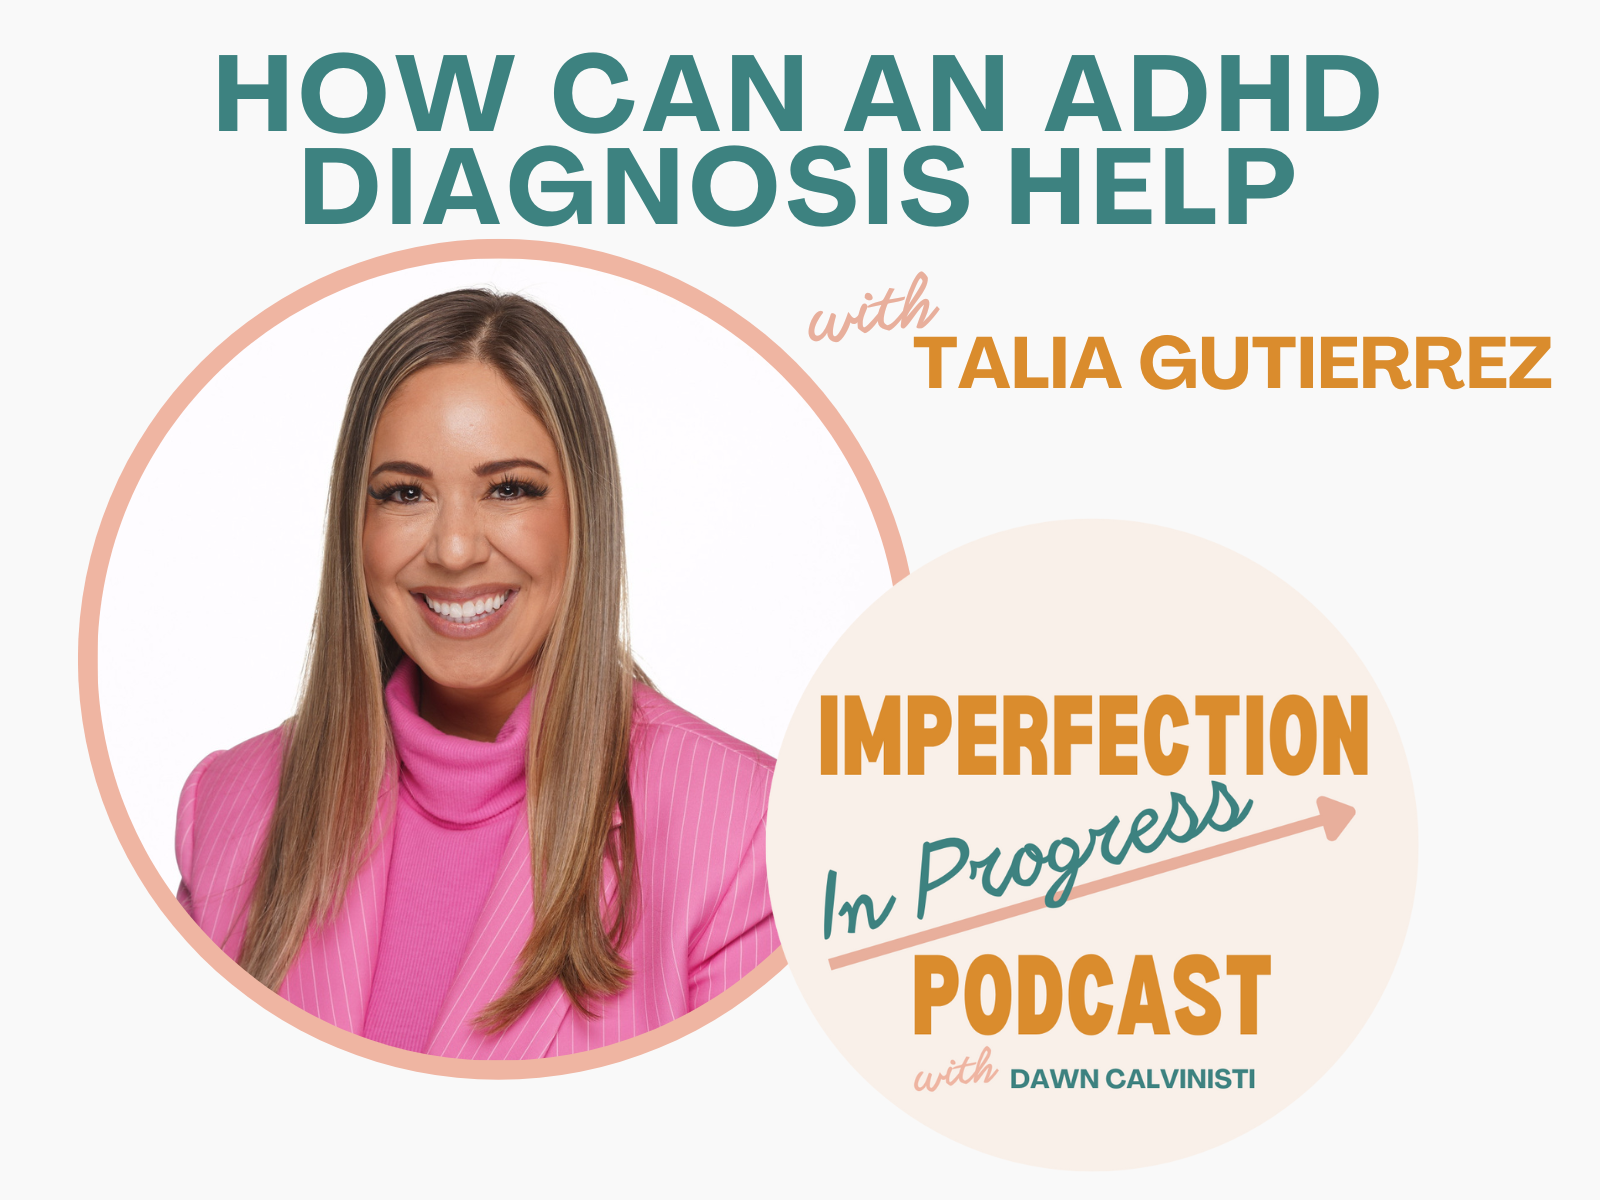 How Can An ADHD Diagnosis Help with Talia Gutierrez